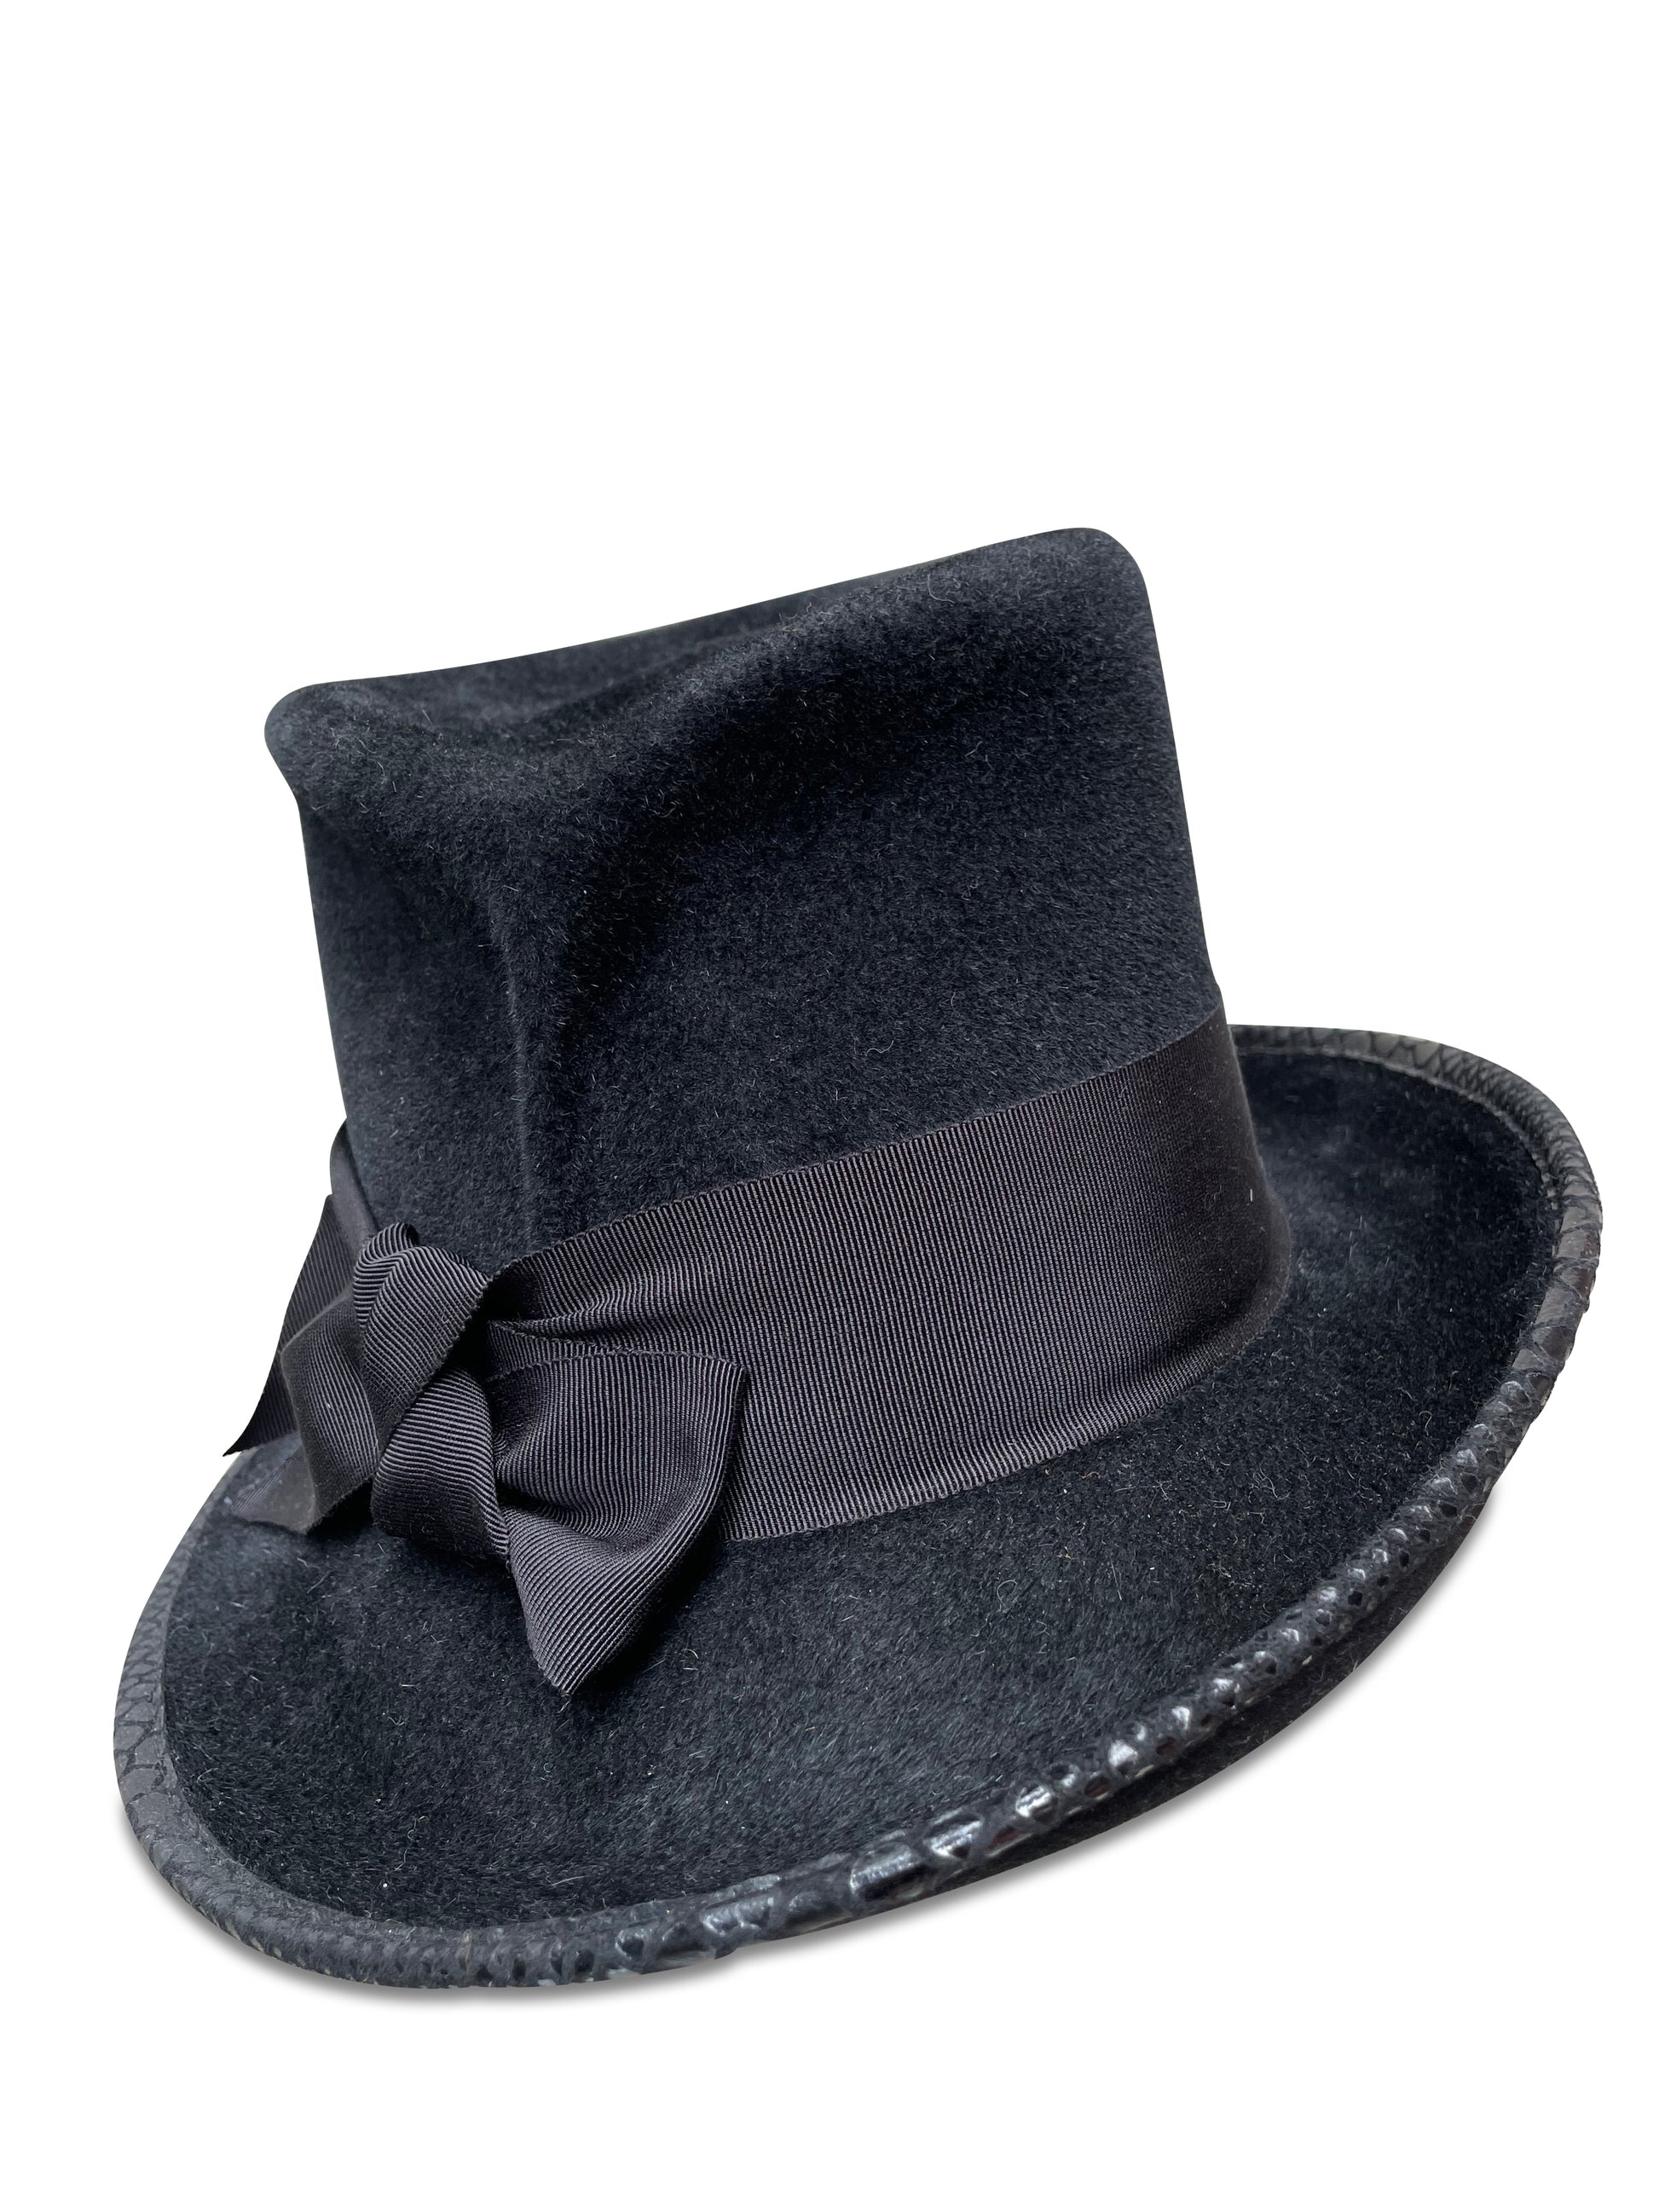 Topedora black top hat combined with a fedora for a unique hat look